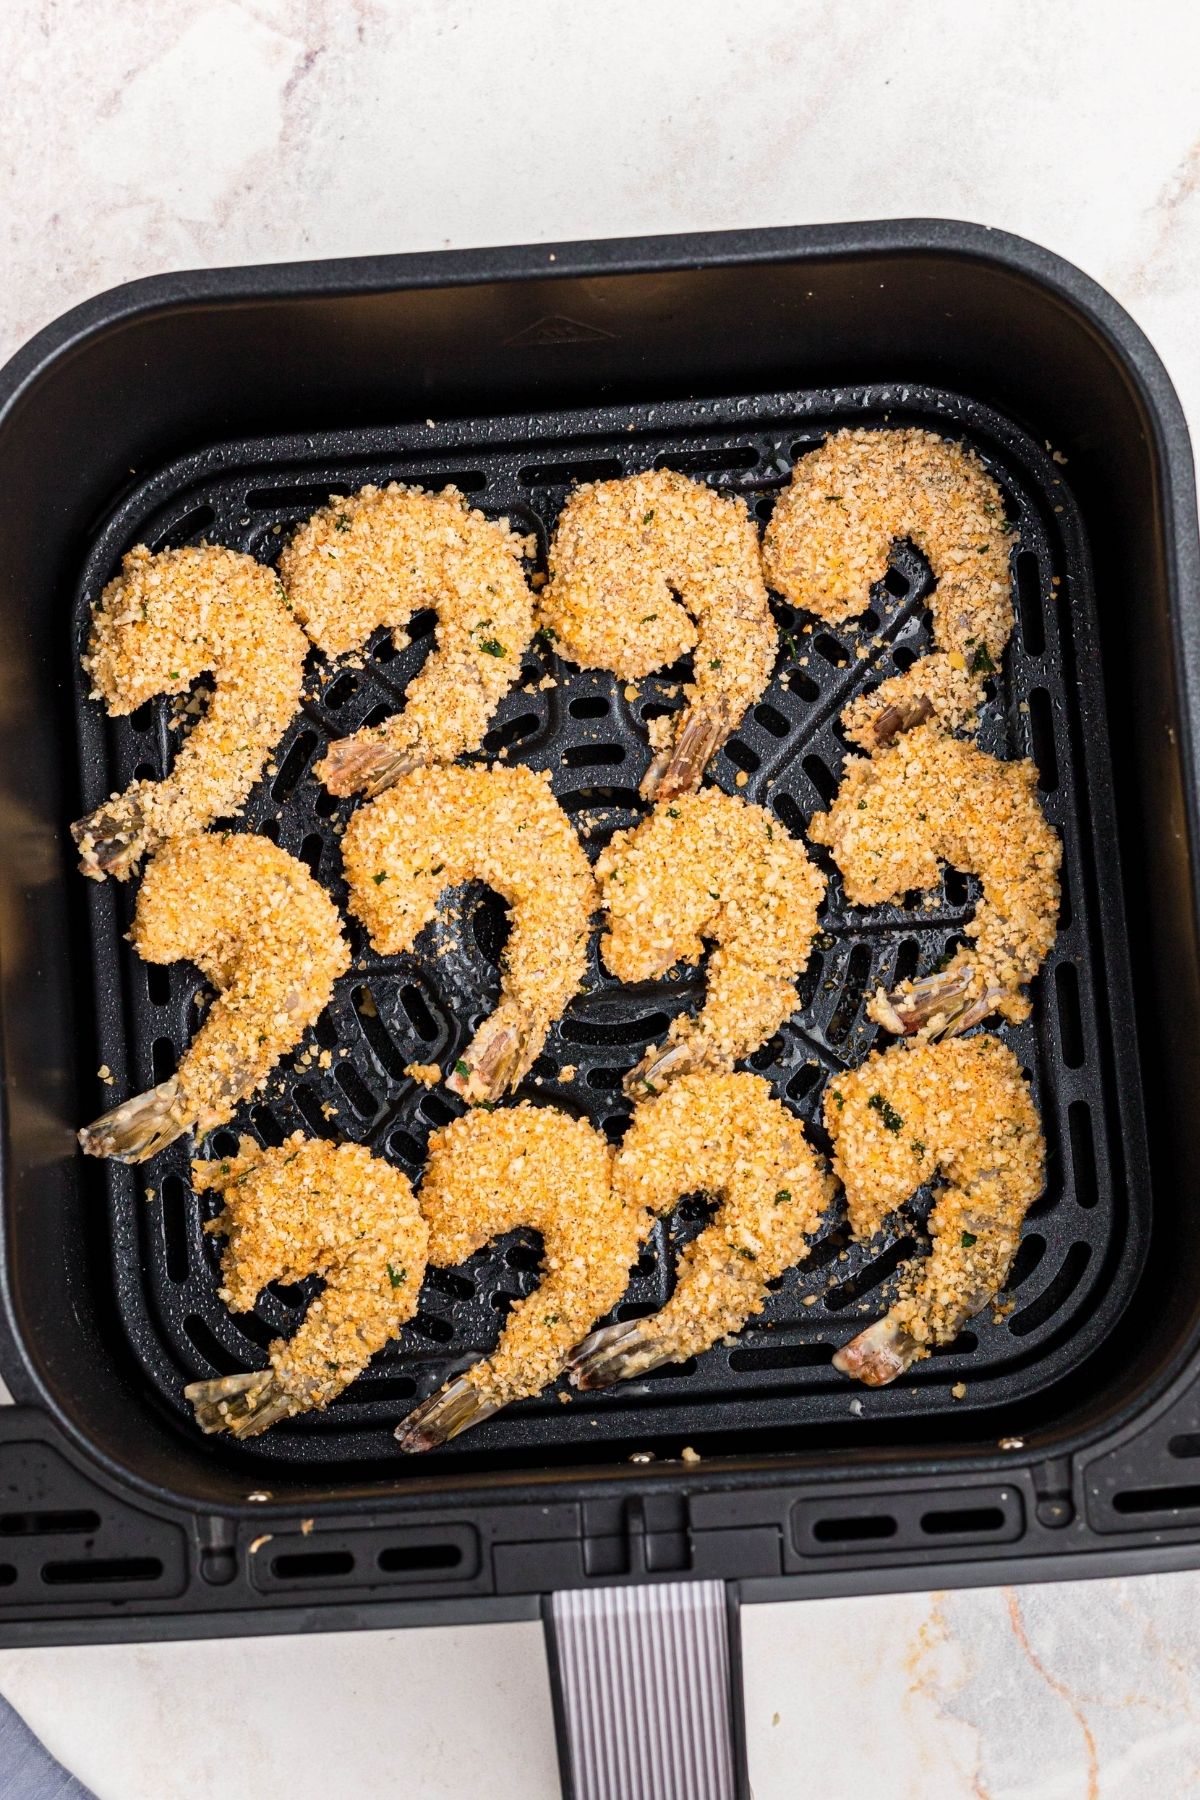 Battered and coated uncooked shrimp in the air fryer basket